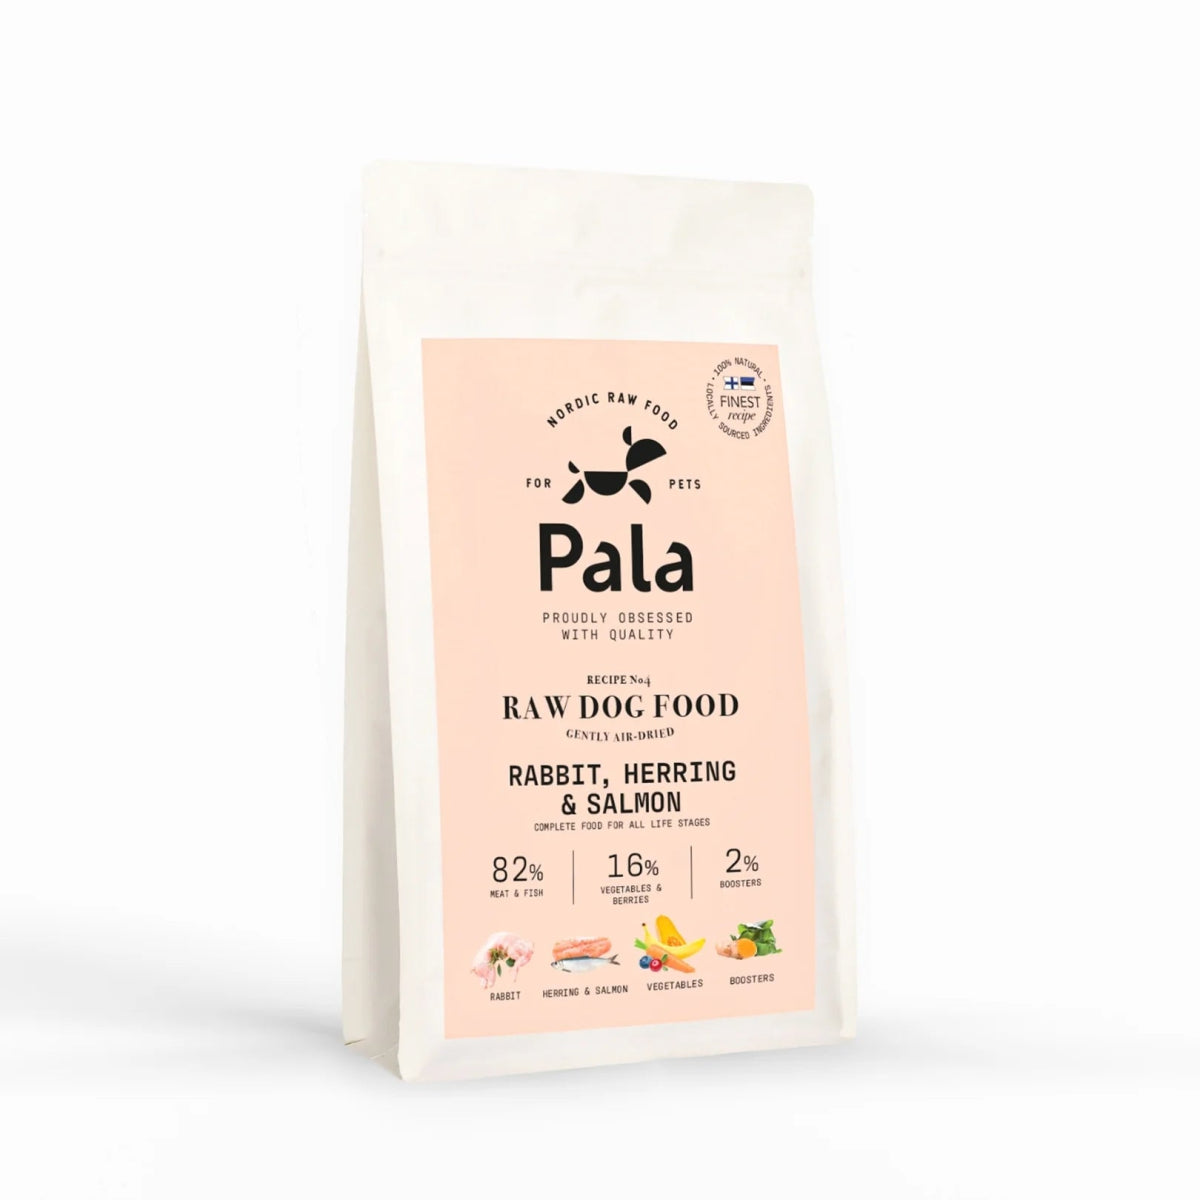 PALA RAW DOG FOOD, Rabbit, Herring & Salmon, 100% Natural Air-Dried Complete Food for Dogs - Okidogi.store